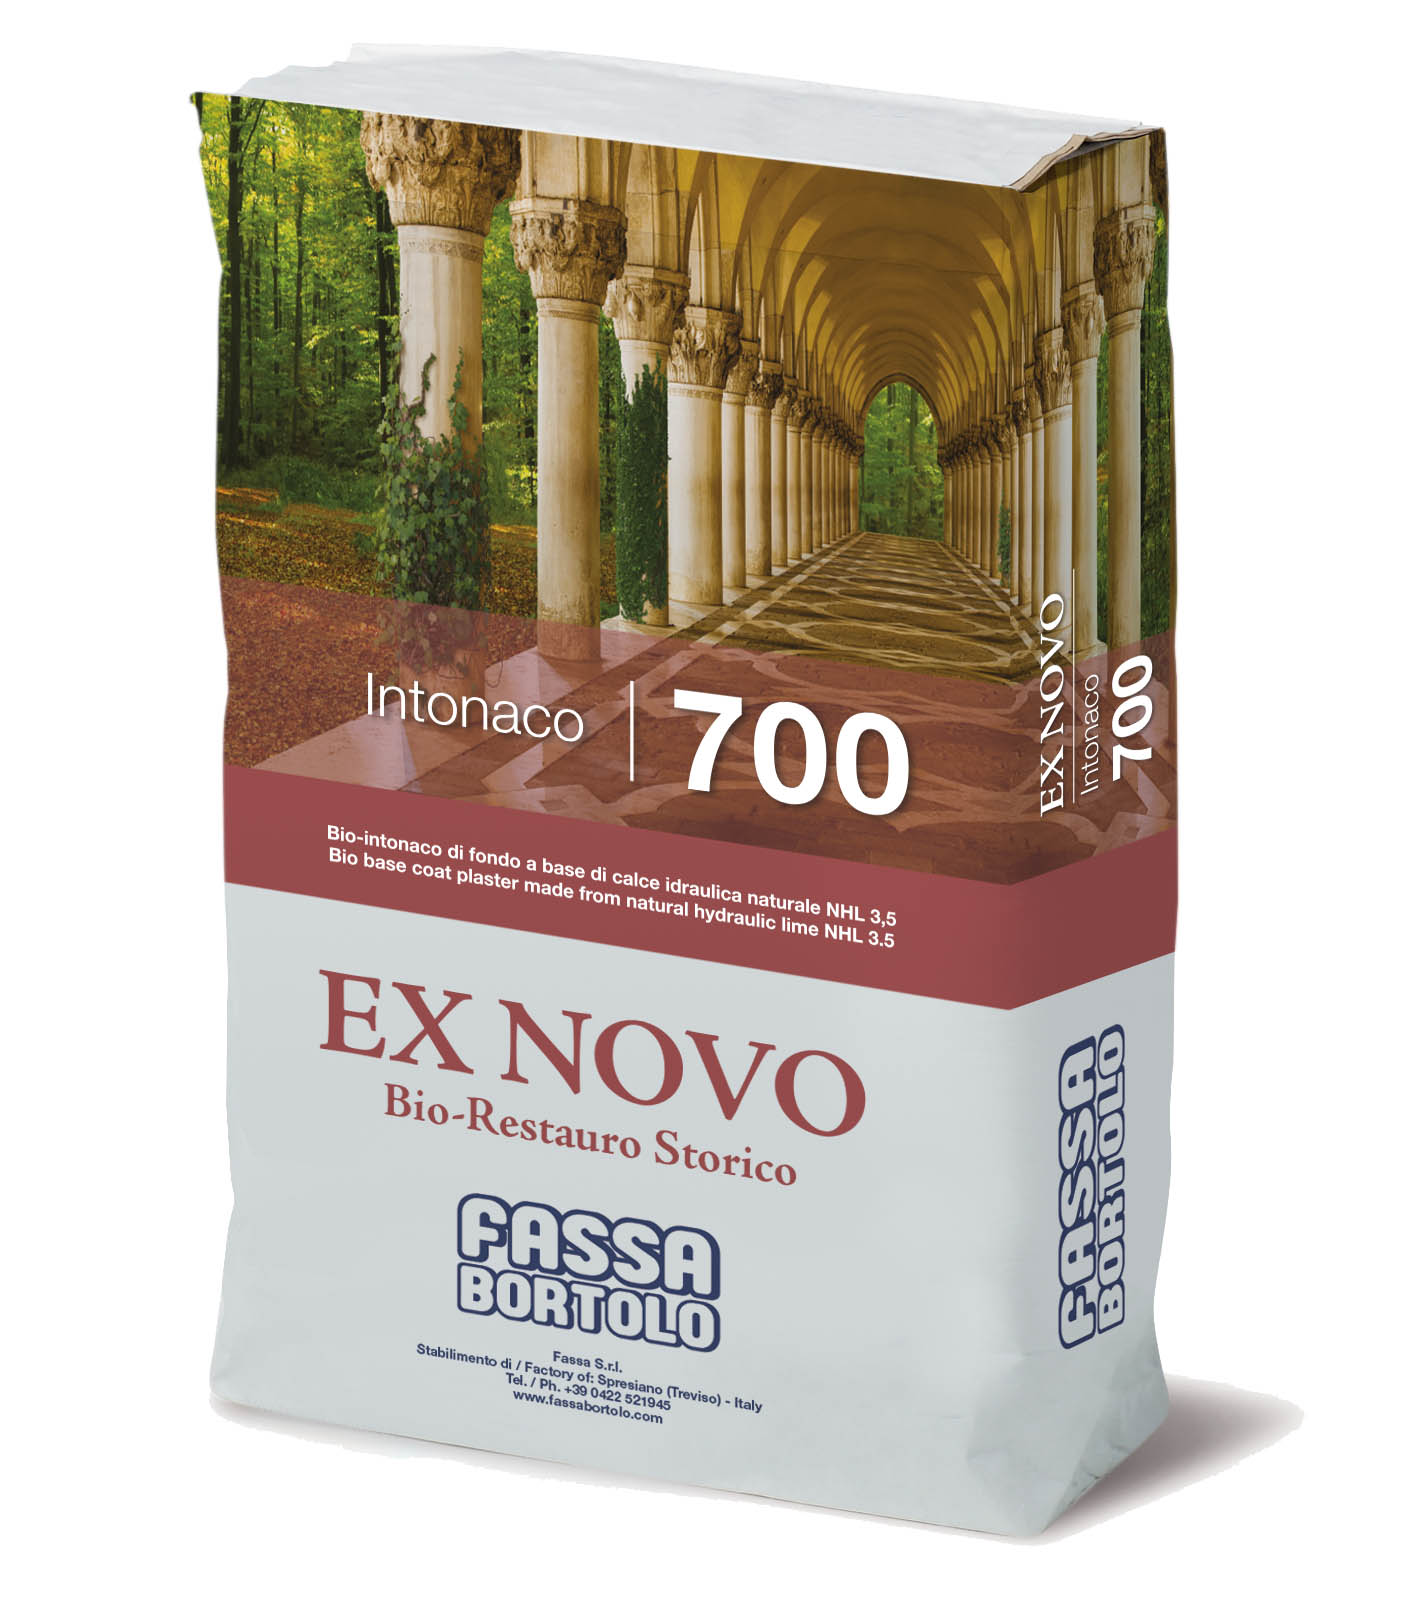 INTONACO 700: Foundation bio-plaster based on natural hydraulic lime NHL 3.5 for interiors and exteriors